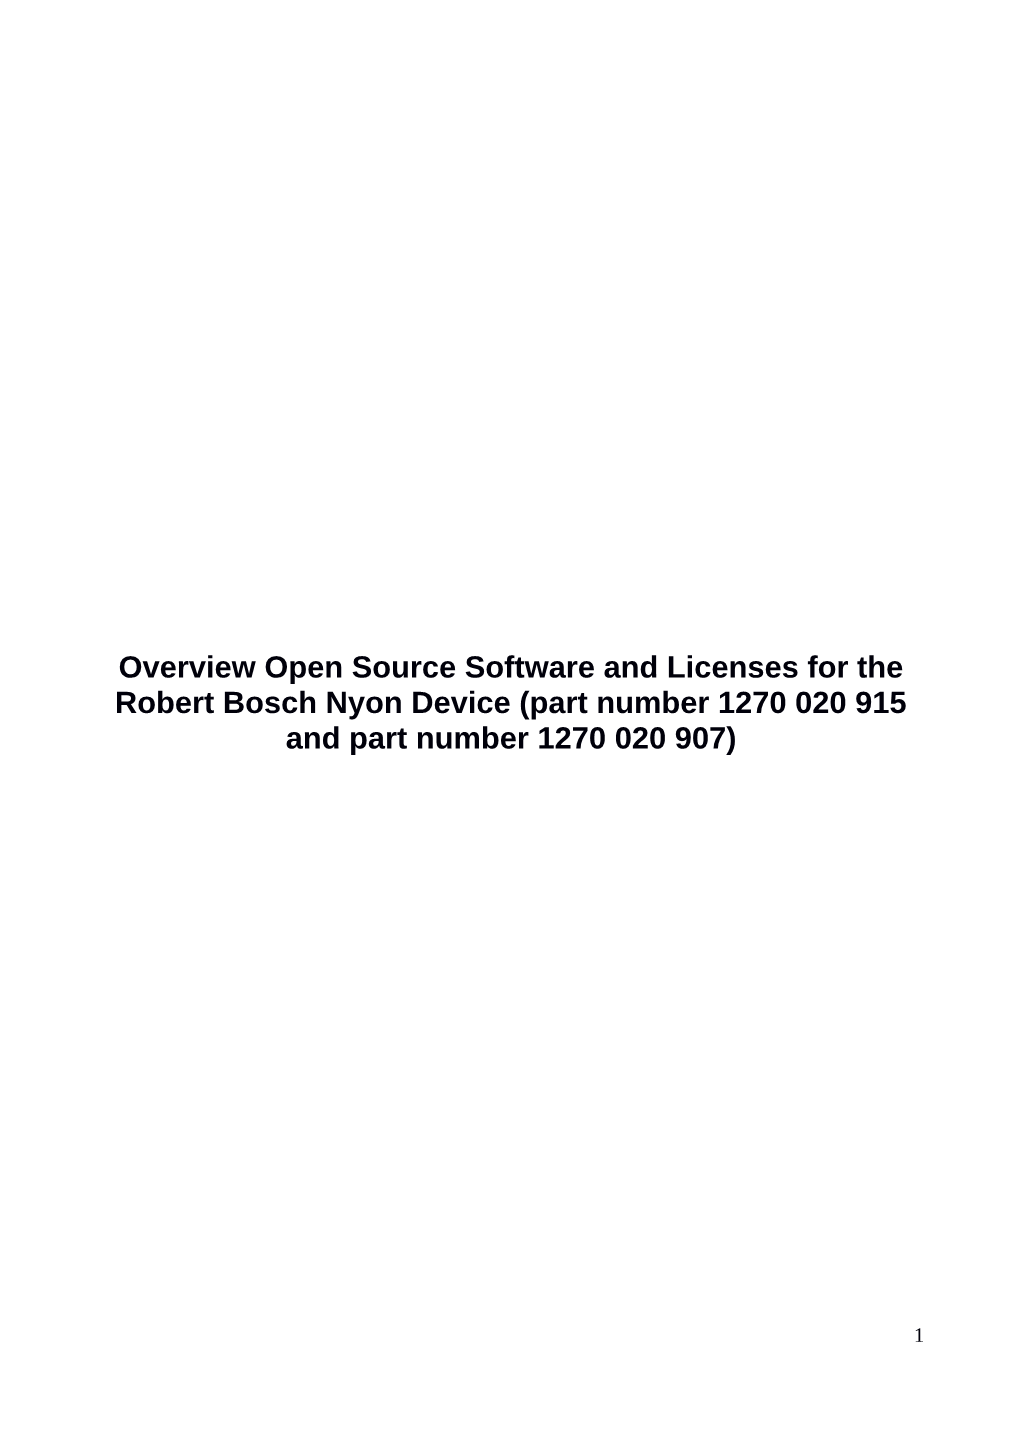 Overview Open Source Software and Licenses for the Robert Bosch Nyon Device (Part Number 1270 020 915 and Part Number 1270 020 907)